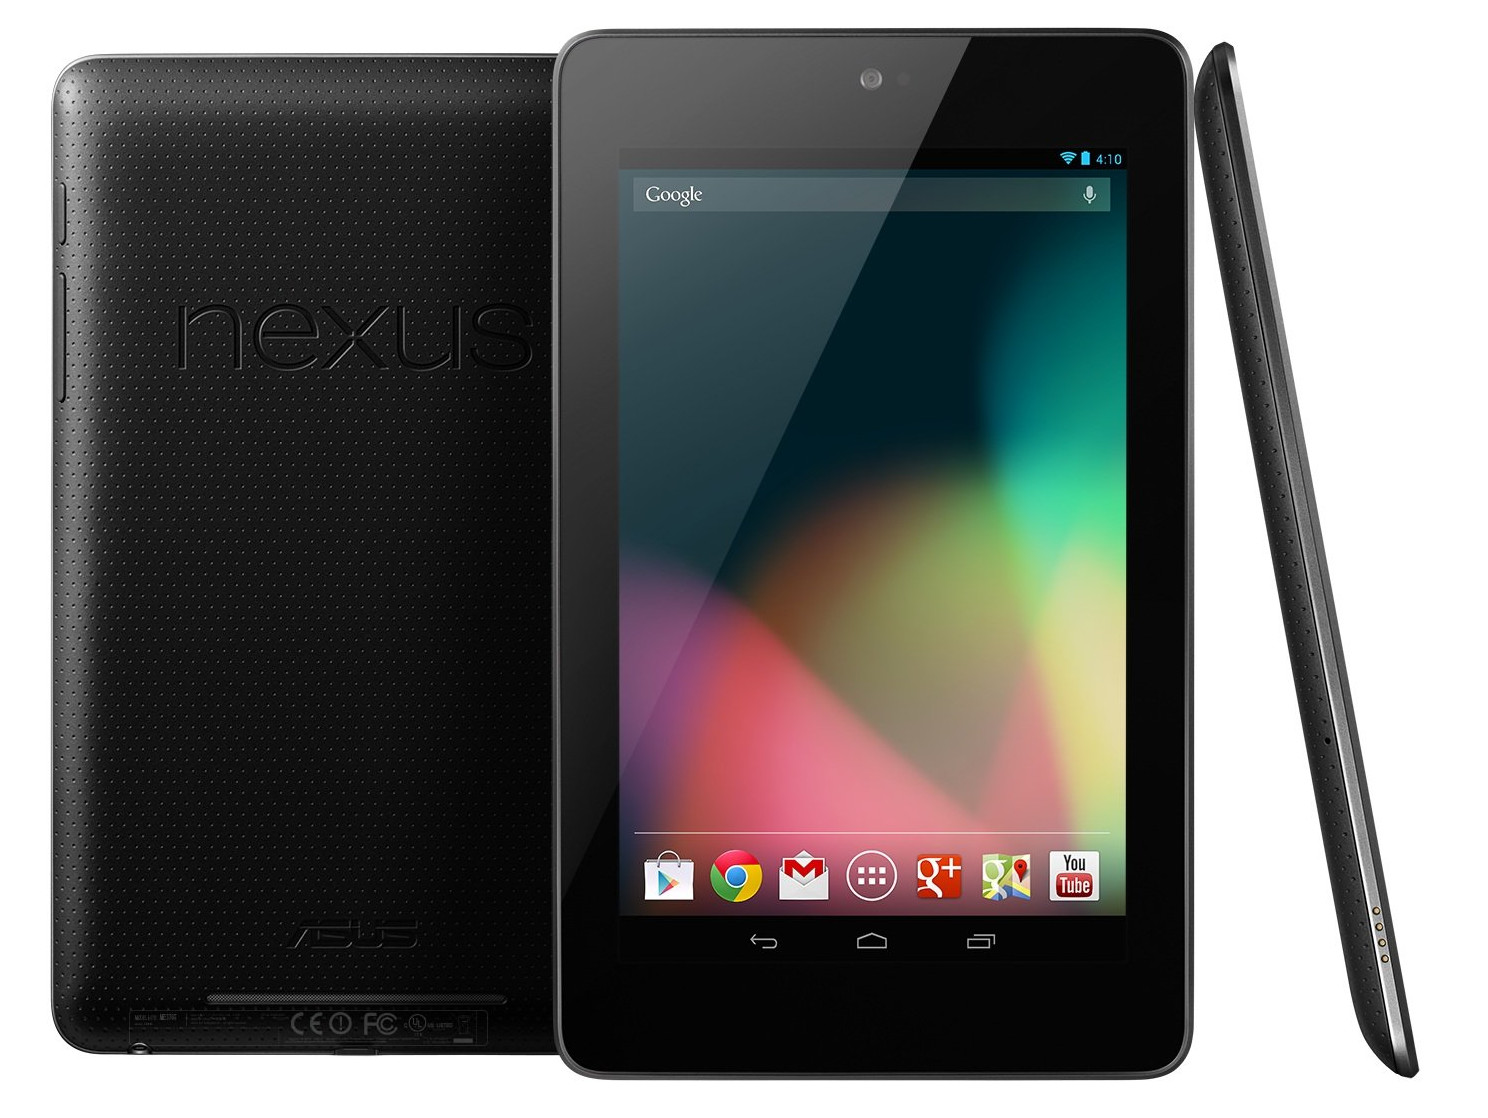 Thinnest 7 Inch Android Tablets Google Nexus 7